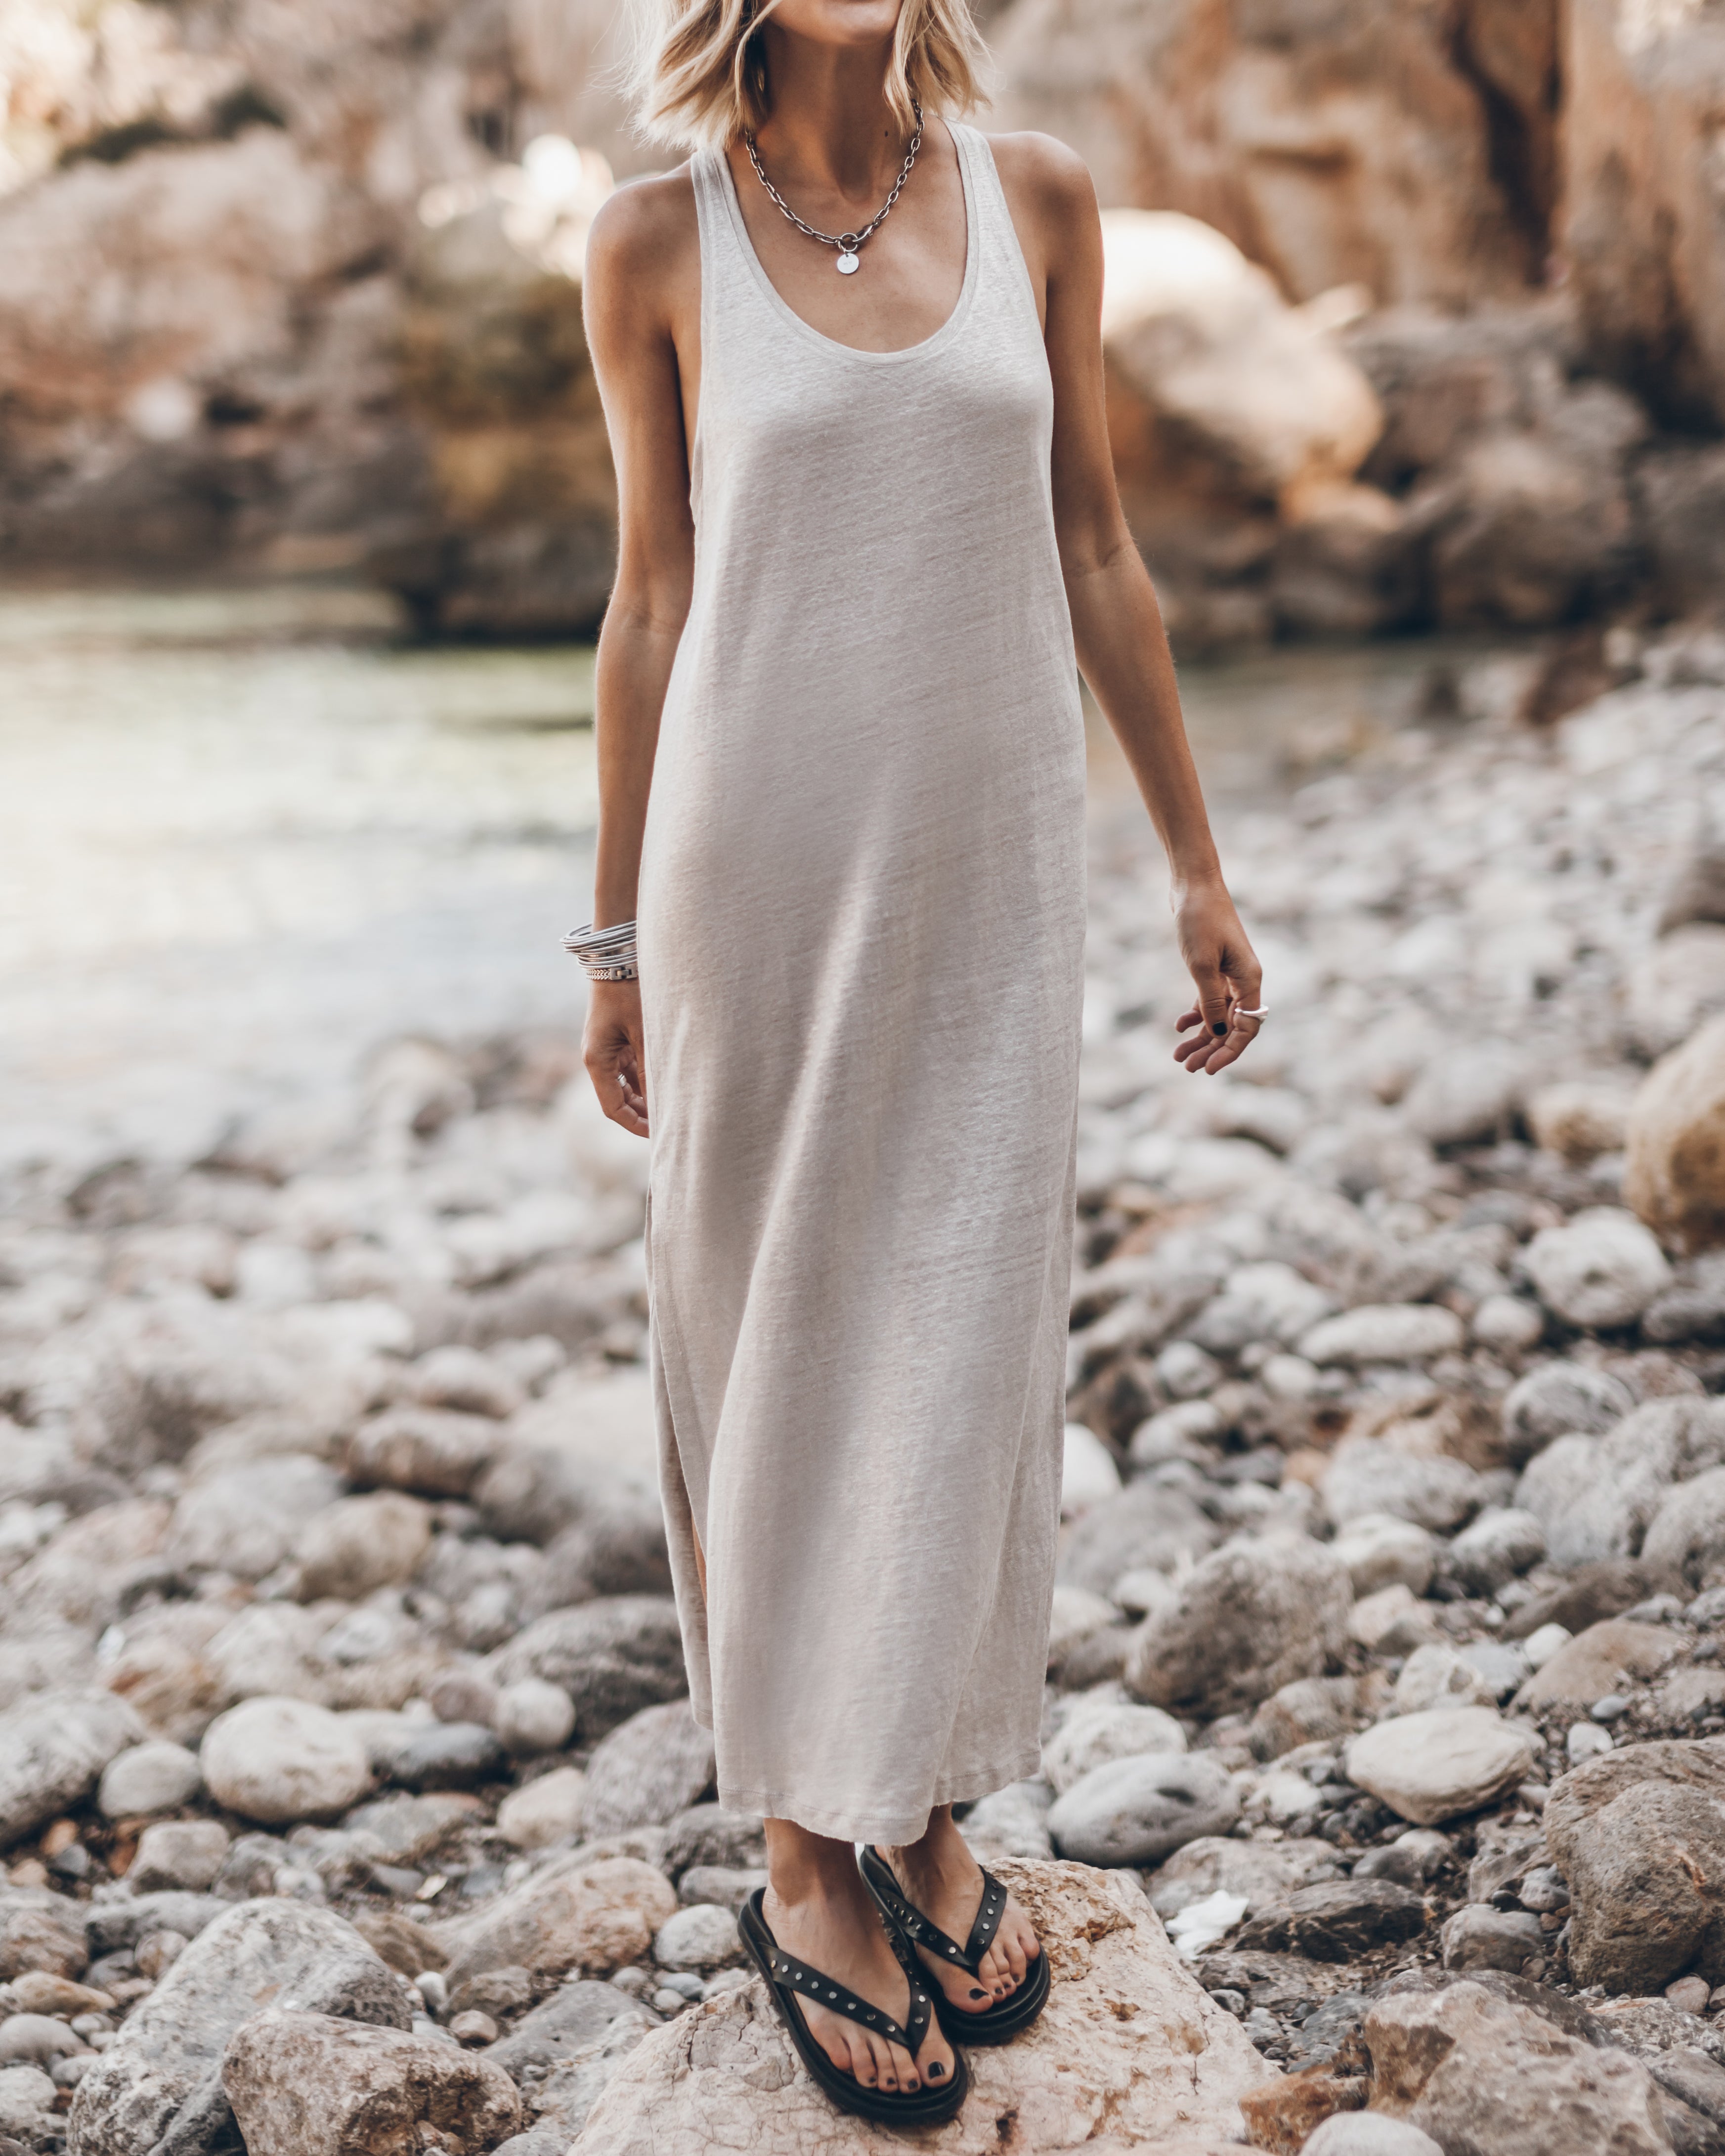 The Light Sparkly Linen Twisted Tank Dress